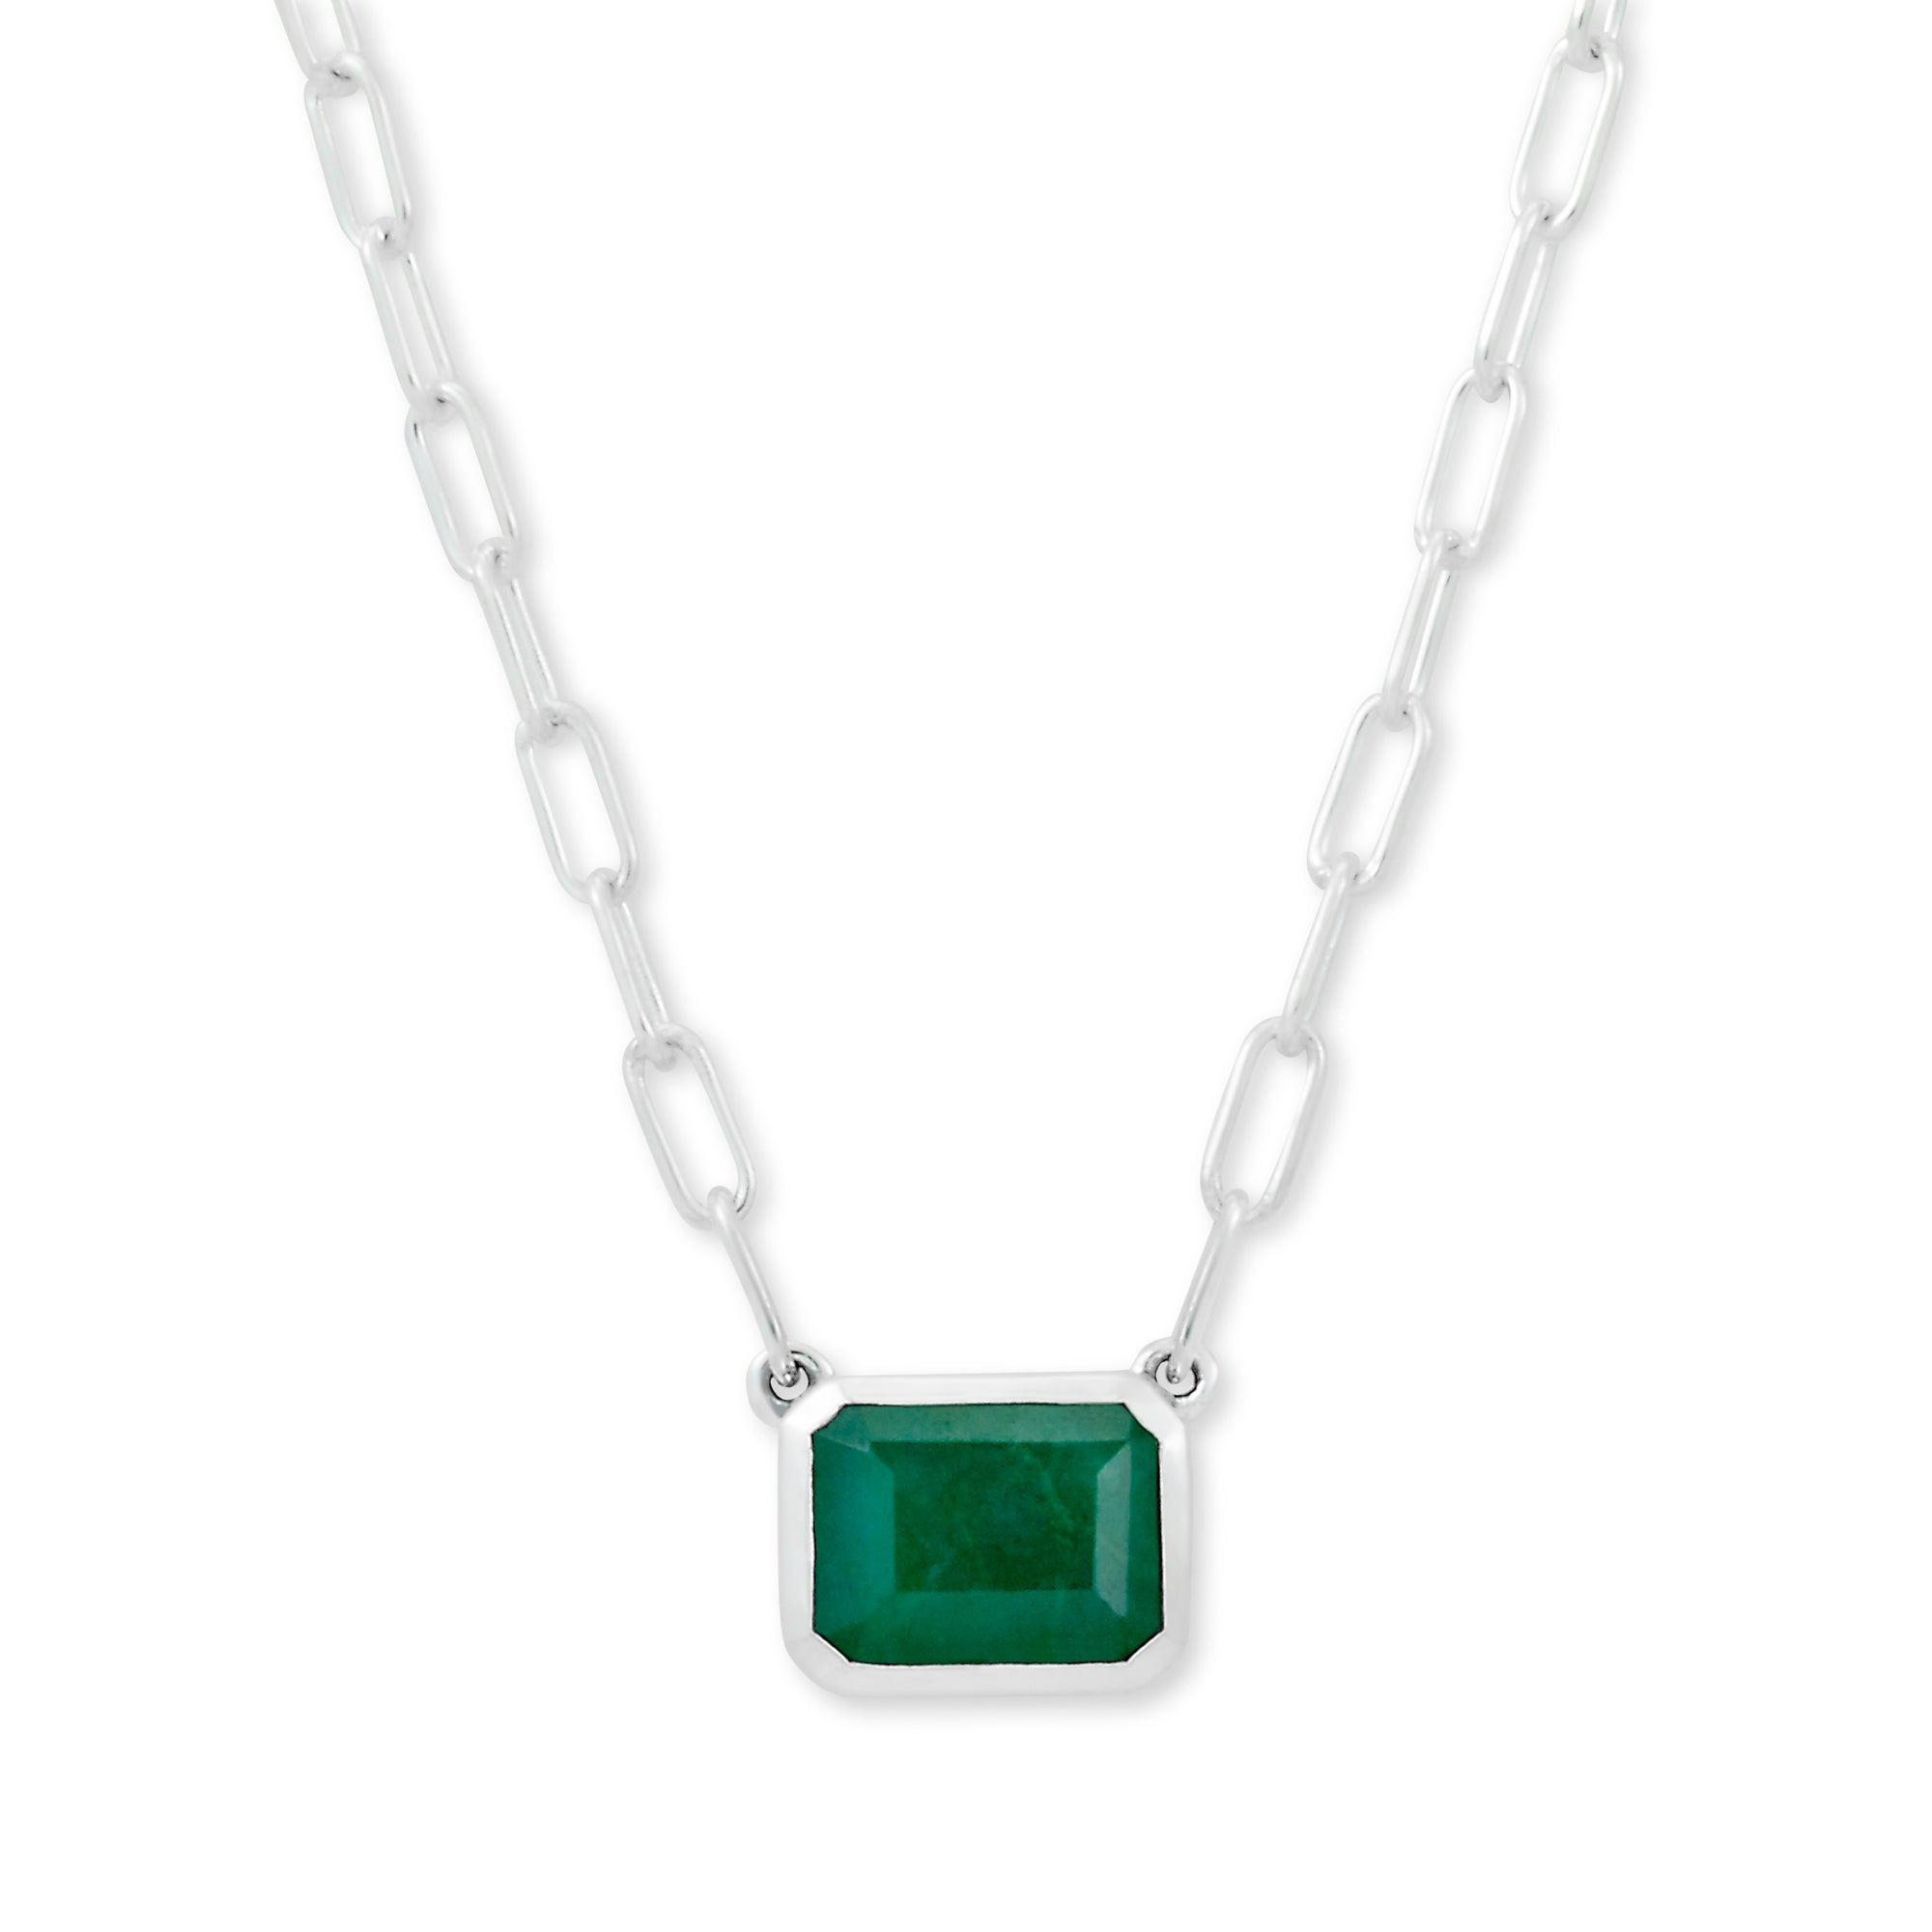 Emerald Eirini Necklace available at Talisman Collection Fine Jewelers in El Dorado Hills, CA and online. Specs: Emerald Eirini Necklace features an emerald-cut emerald solitaire necklace measuring 7x9mm, and is set in Sterling Silver. 